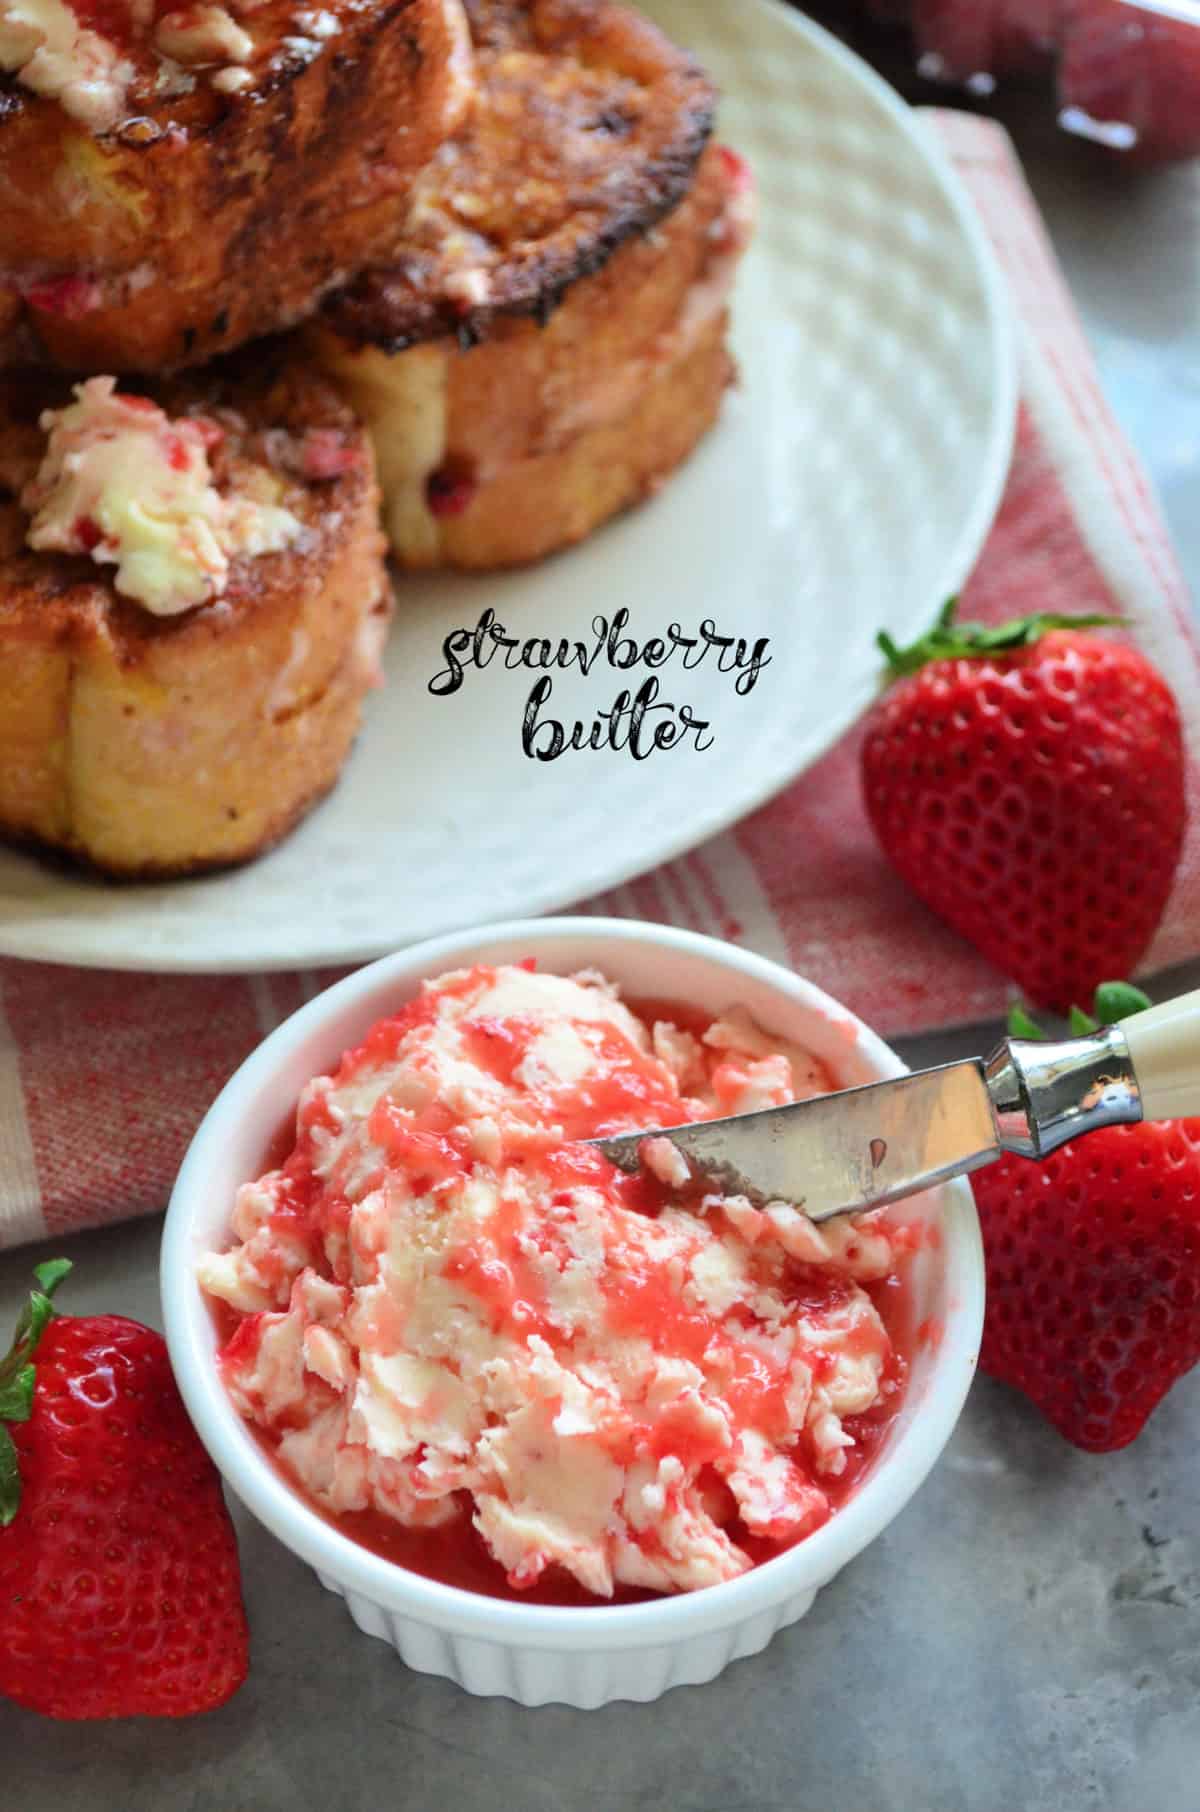 small bowl of chopped strawberries mixed with butter next to platter of french toast with title text.